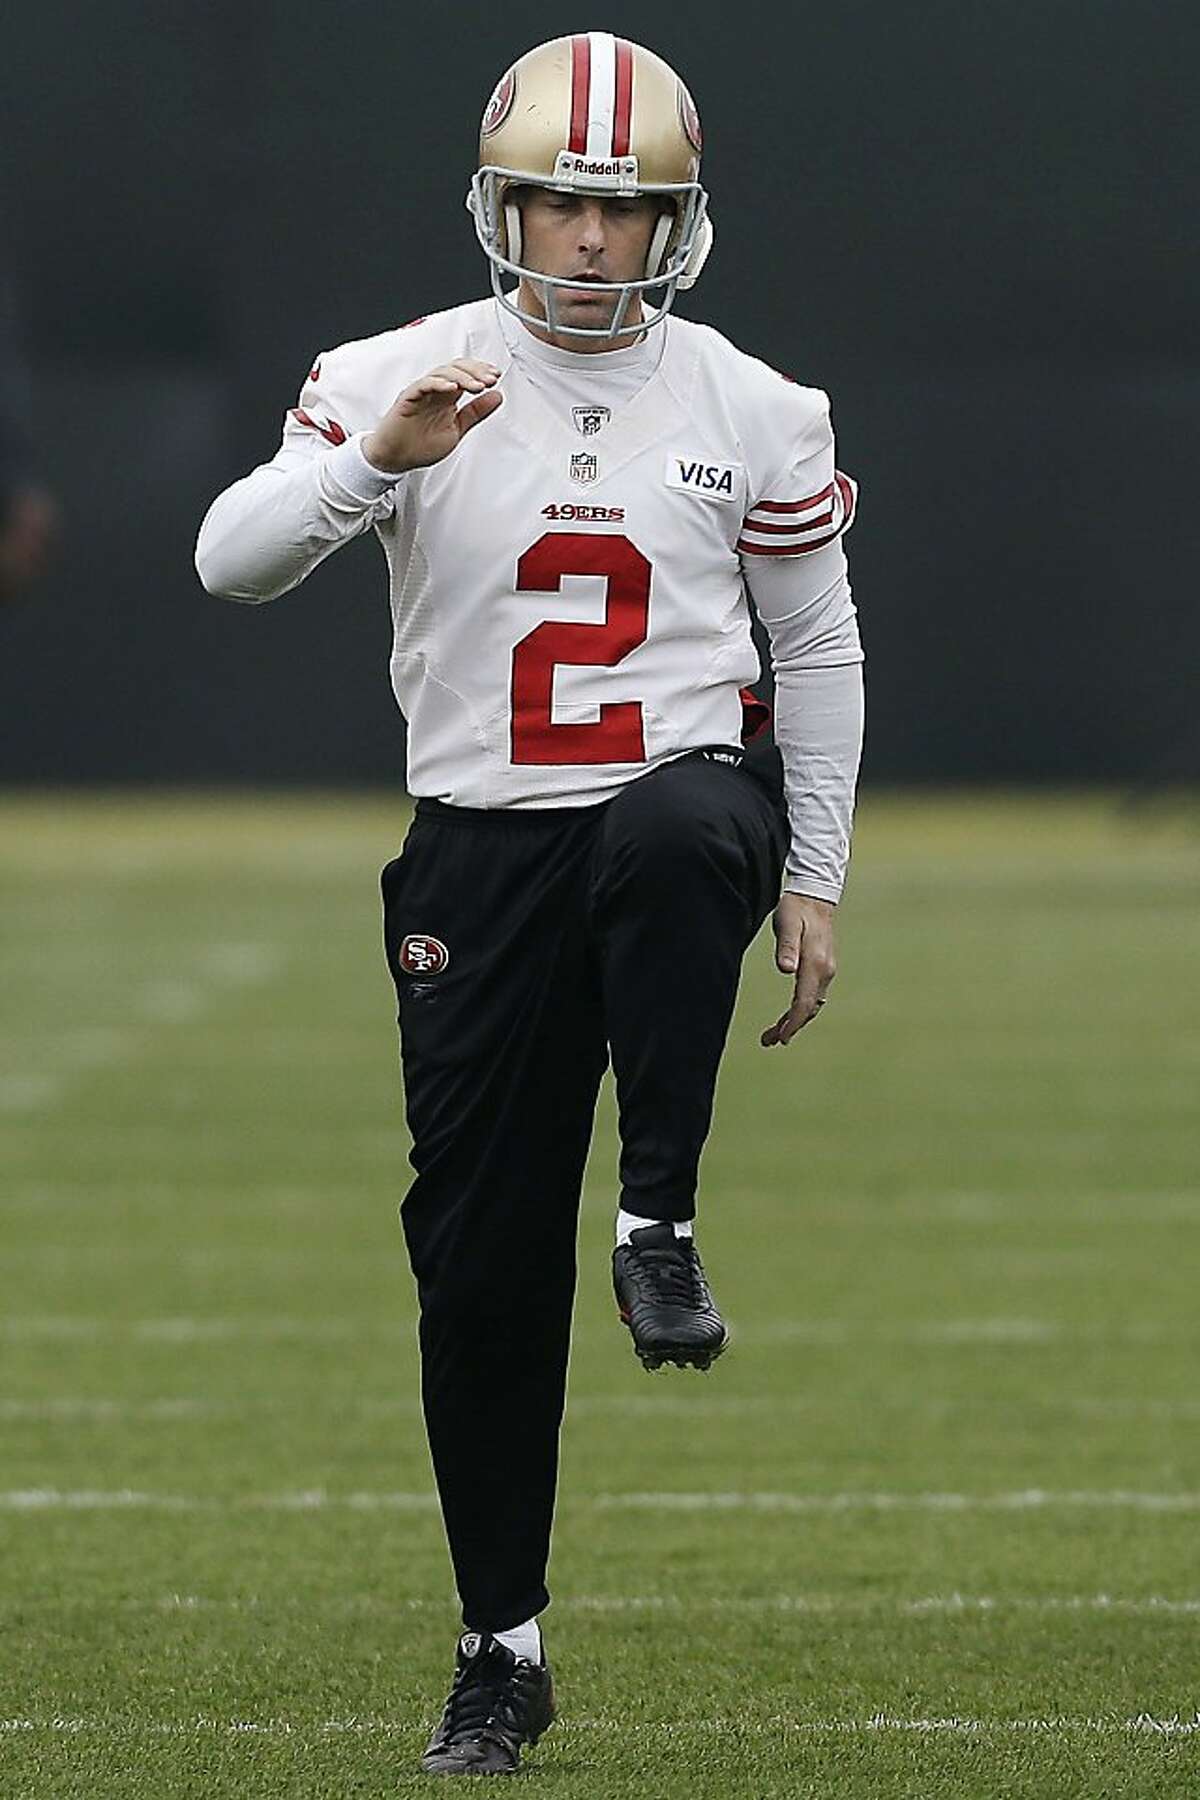 San Francisco 49ers place kicker David Akers (2) practices at an NFL football training facility in Santa Clara, Calif., Wednesday, Jan. 23, 2013. The 49ers are scheduled to play the Baltimore Ravens in Super Bowl XLVII on Sunday, Feb. 3. (AP Photo/Jeff Chiu)